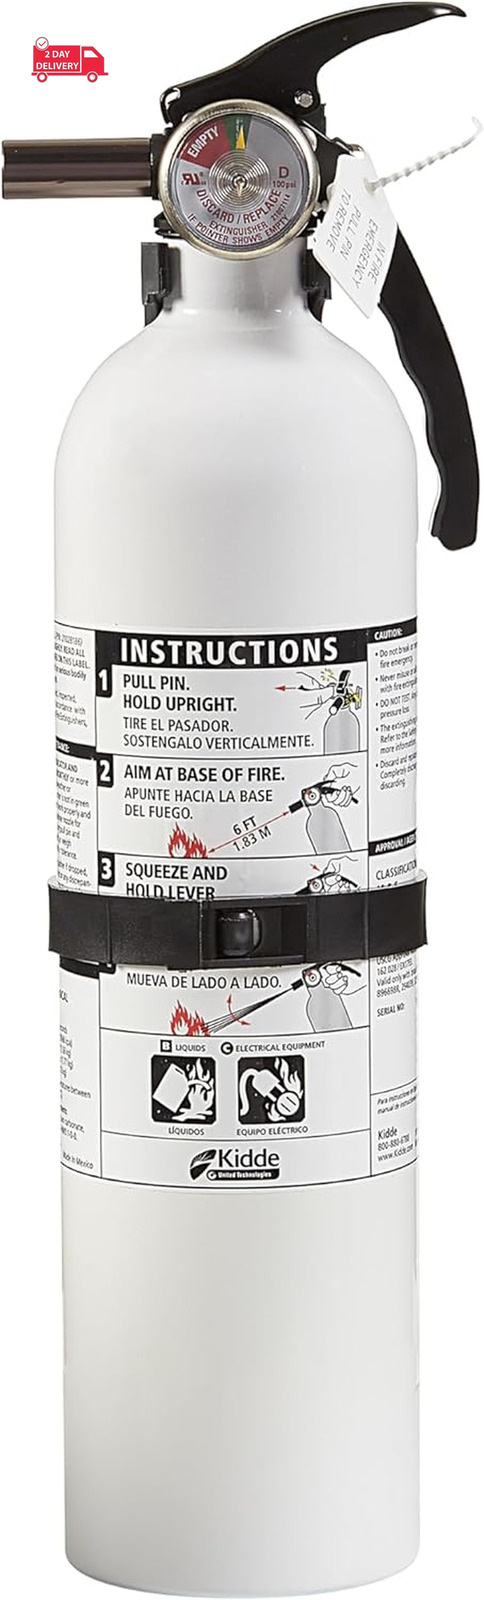 Auto Fire Extinguisher for Car & Truck, 10-B:C, 4 Lbs., Dry Chemical Extinguishe